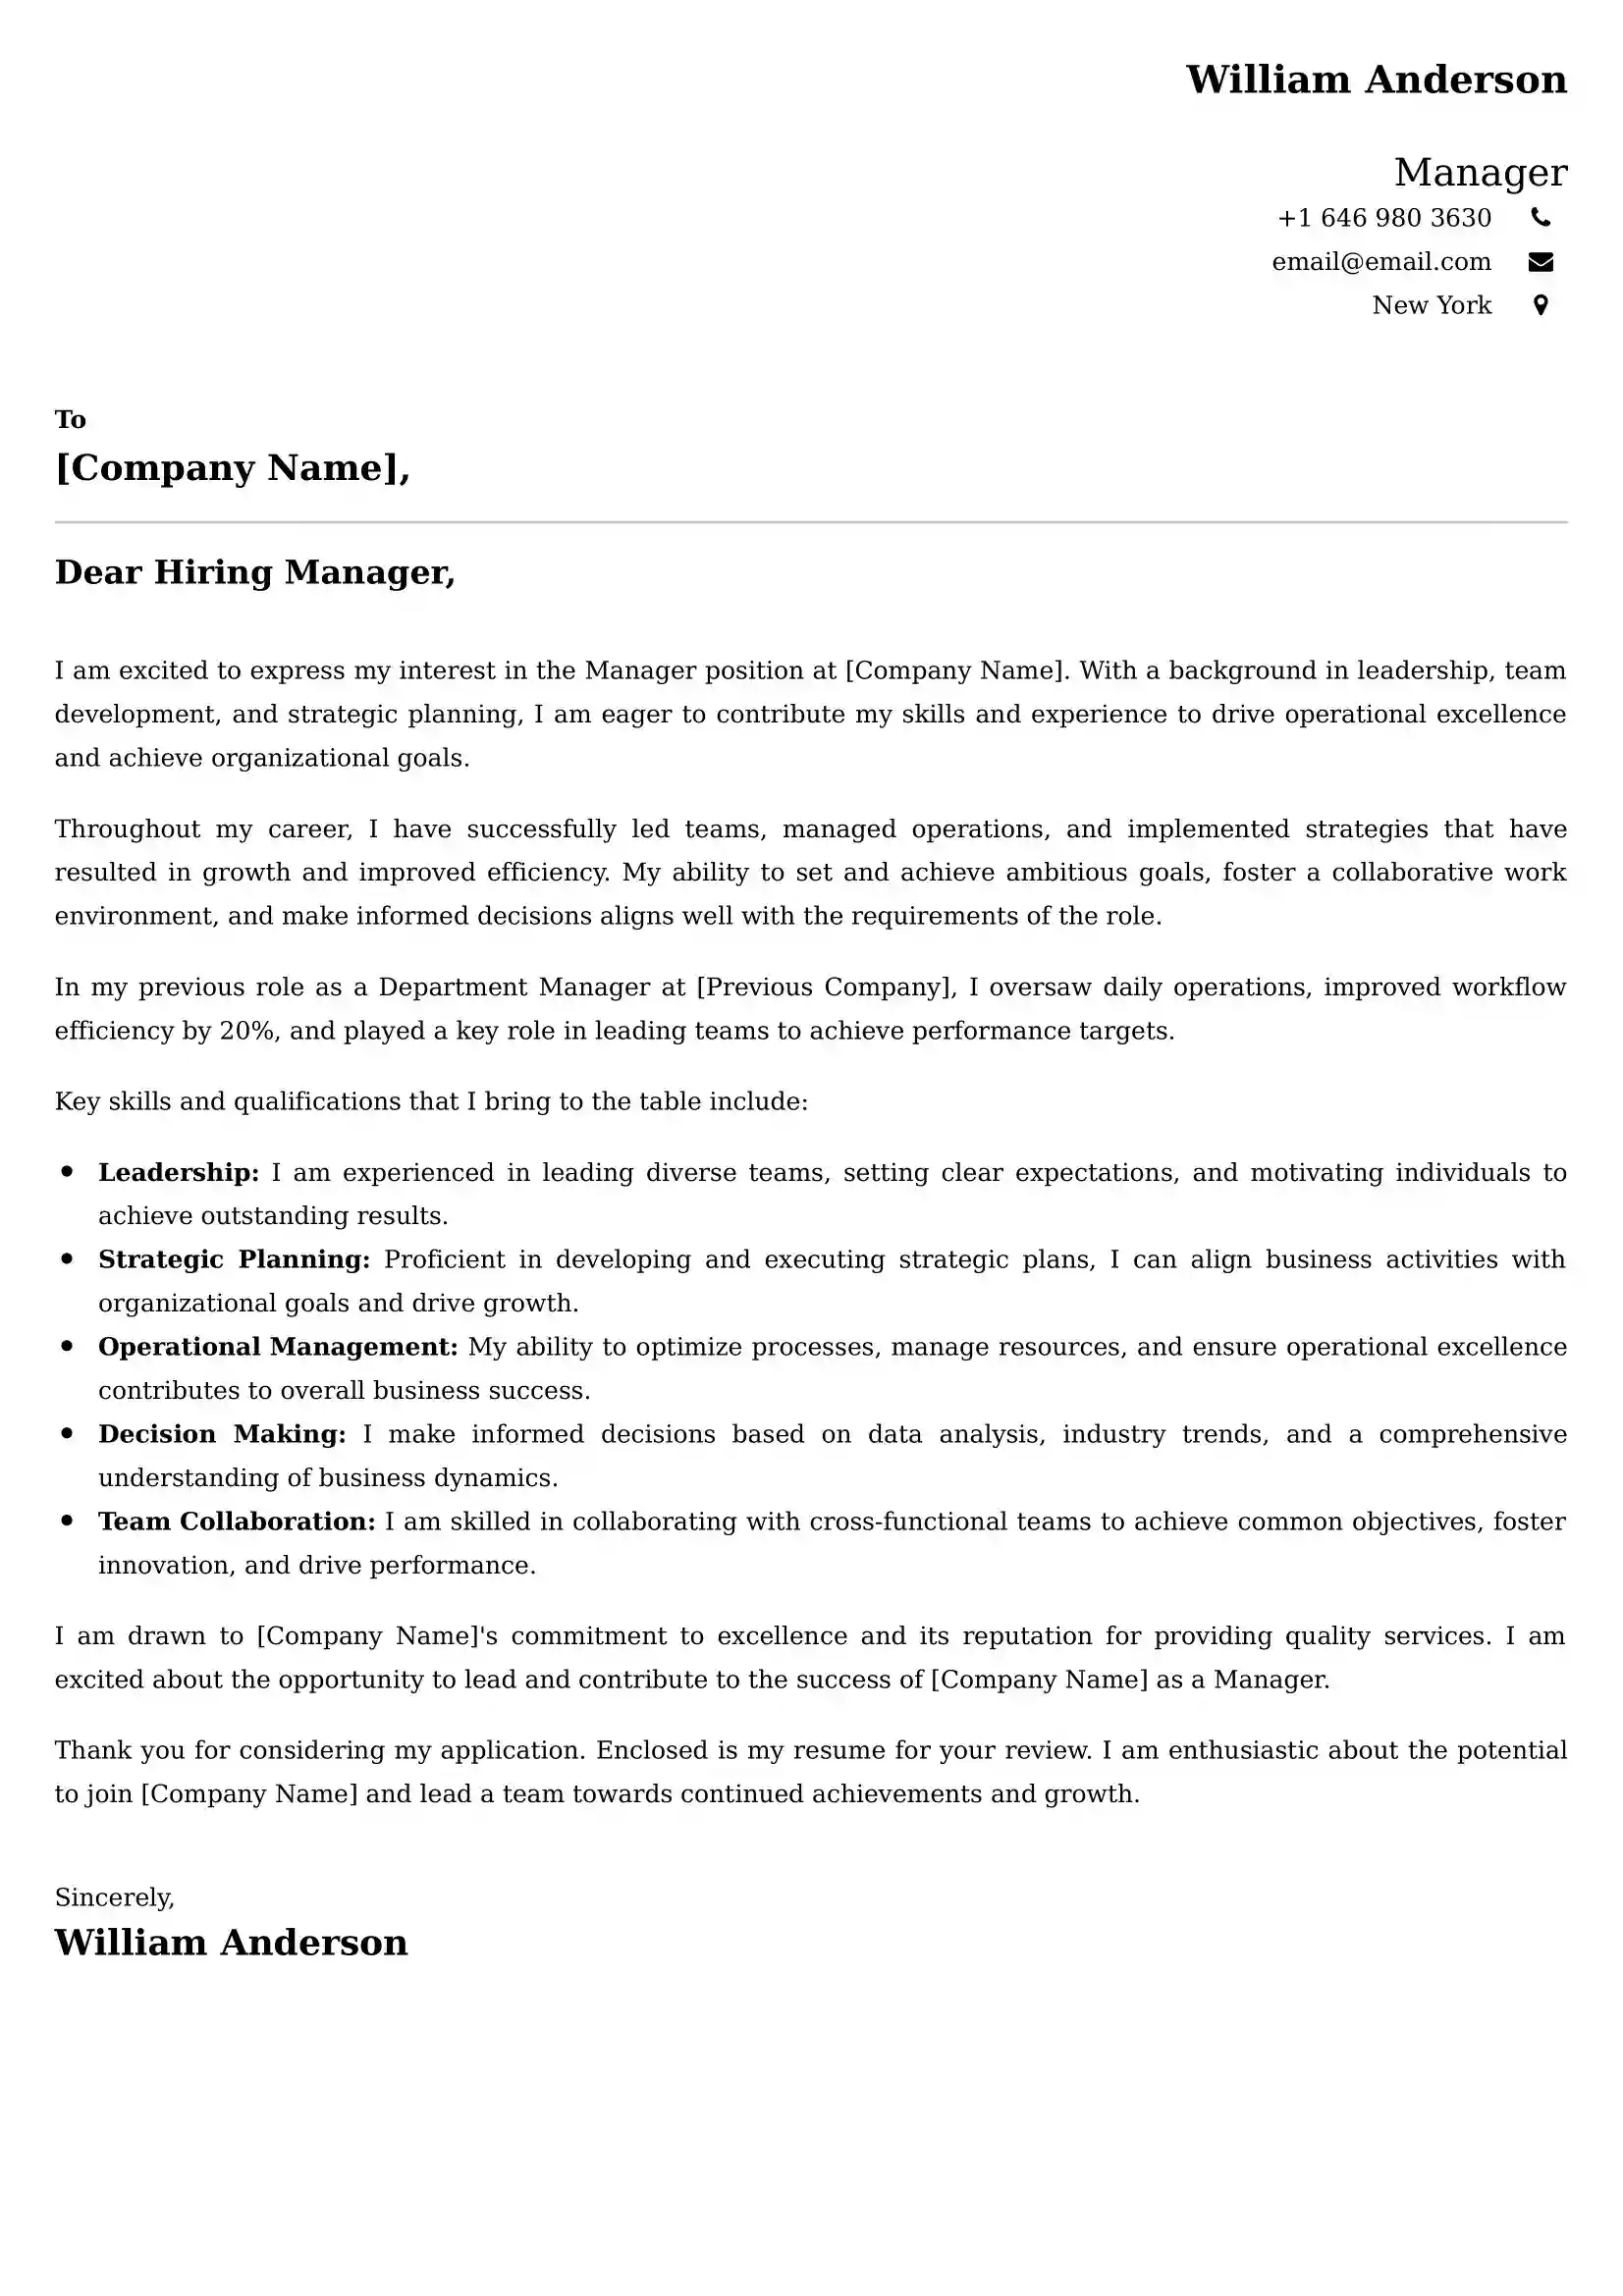 Manager Cover Letter Examples UK - Tips and Guide